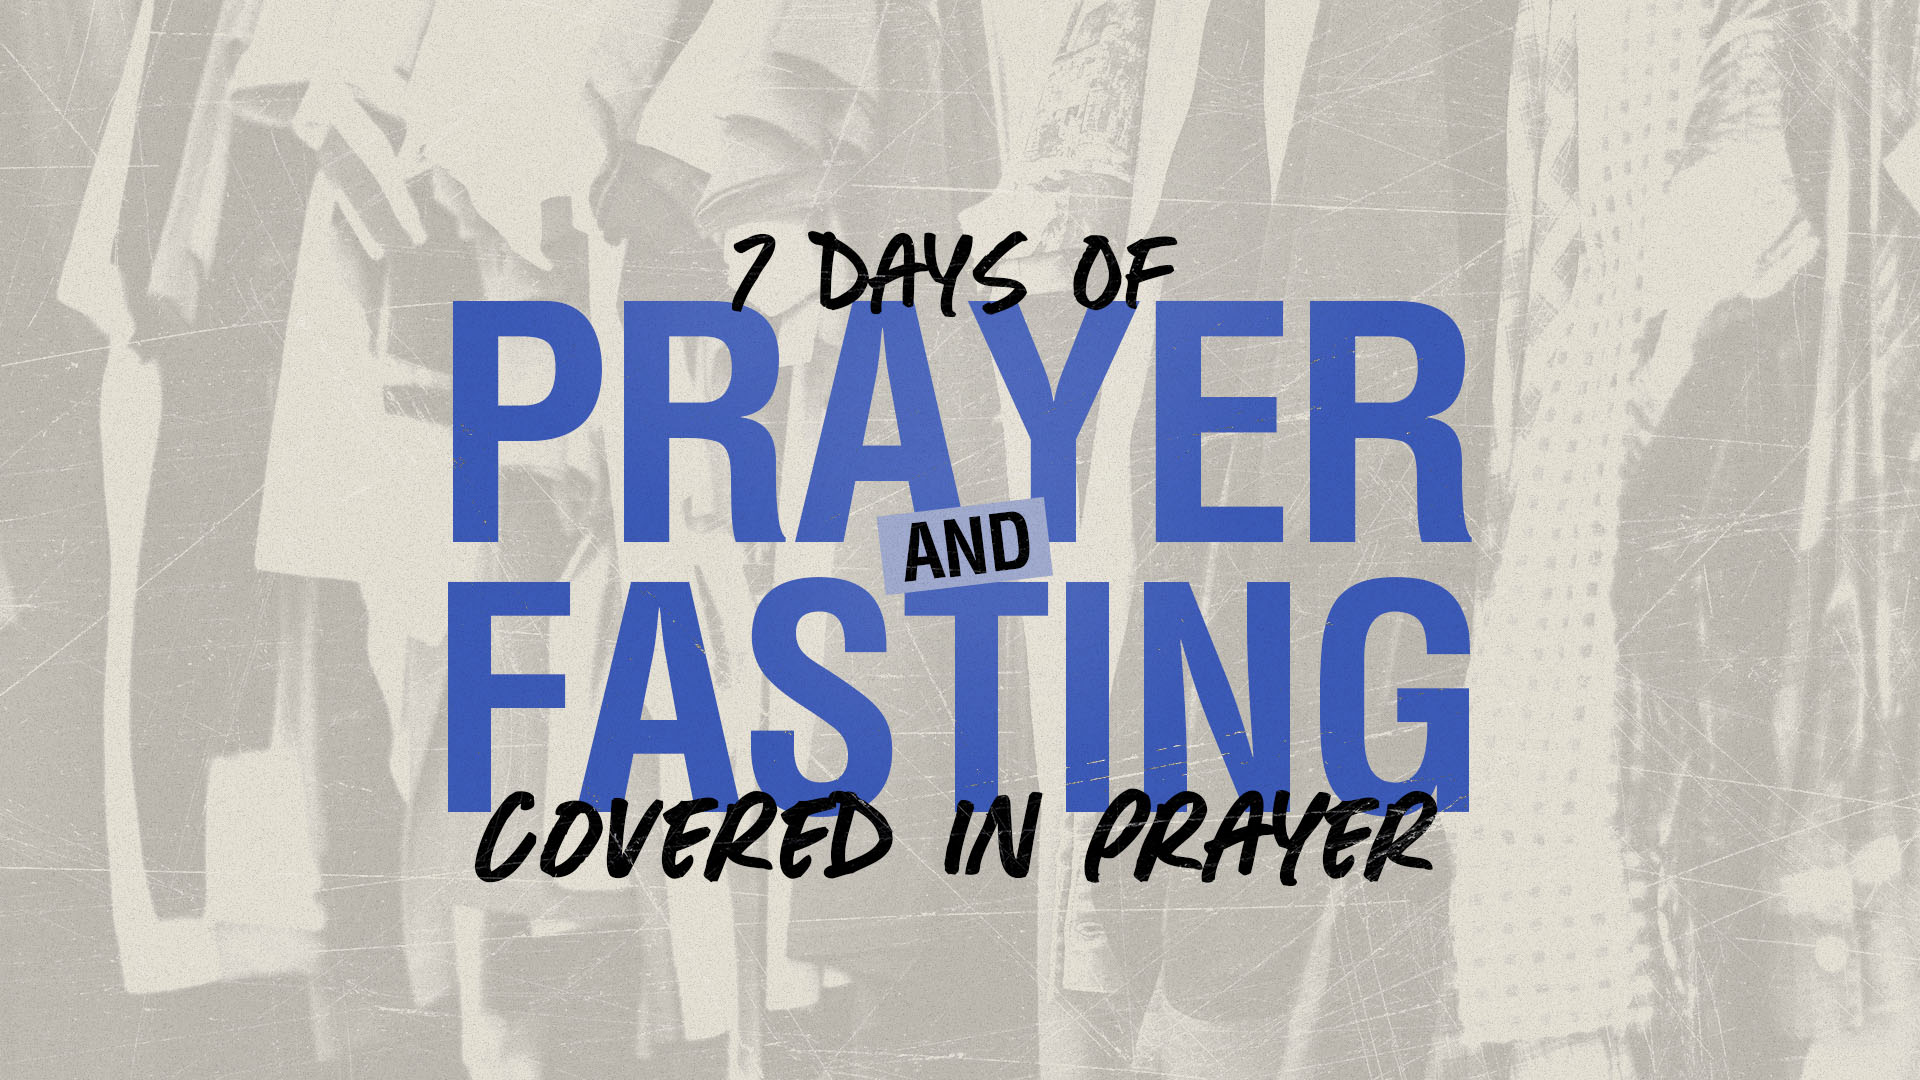 7 Ddays prayer and fasting to arrest every adversary against my open door